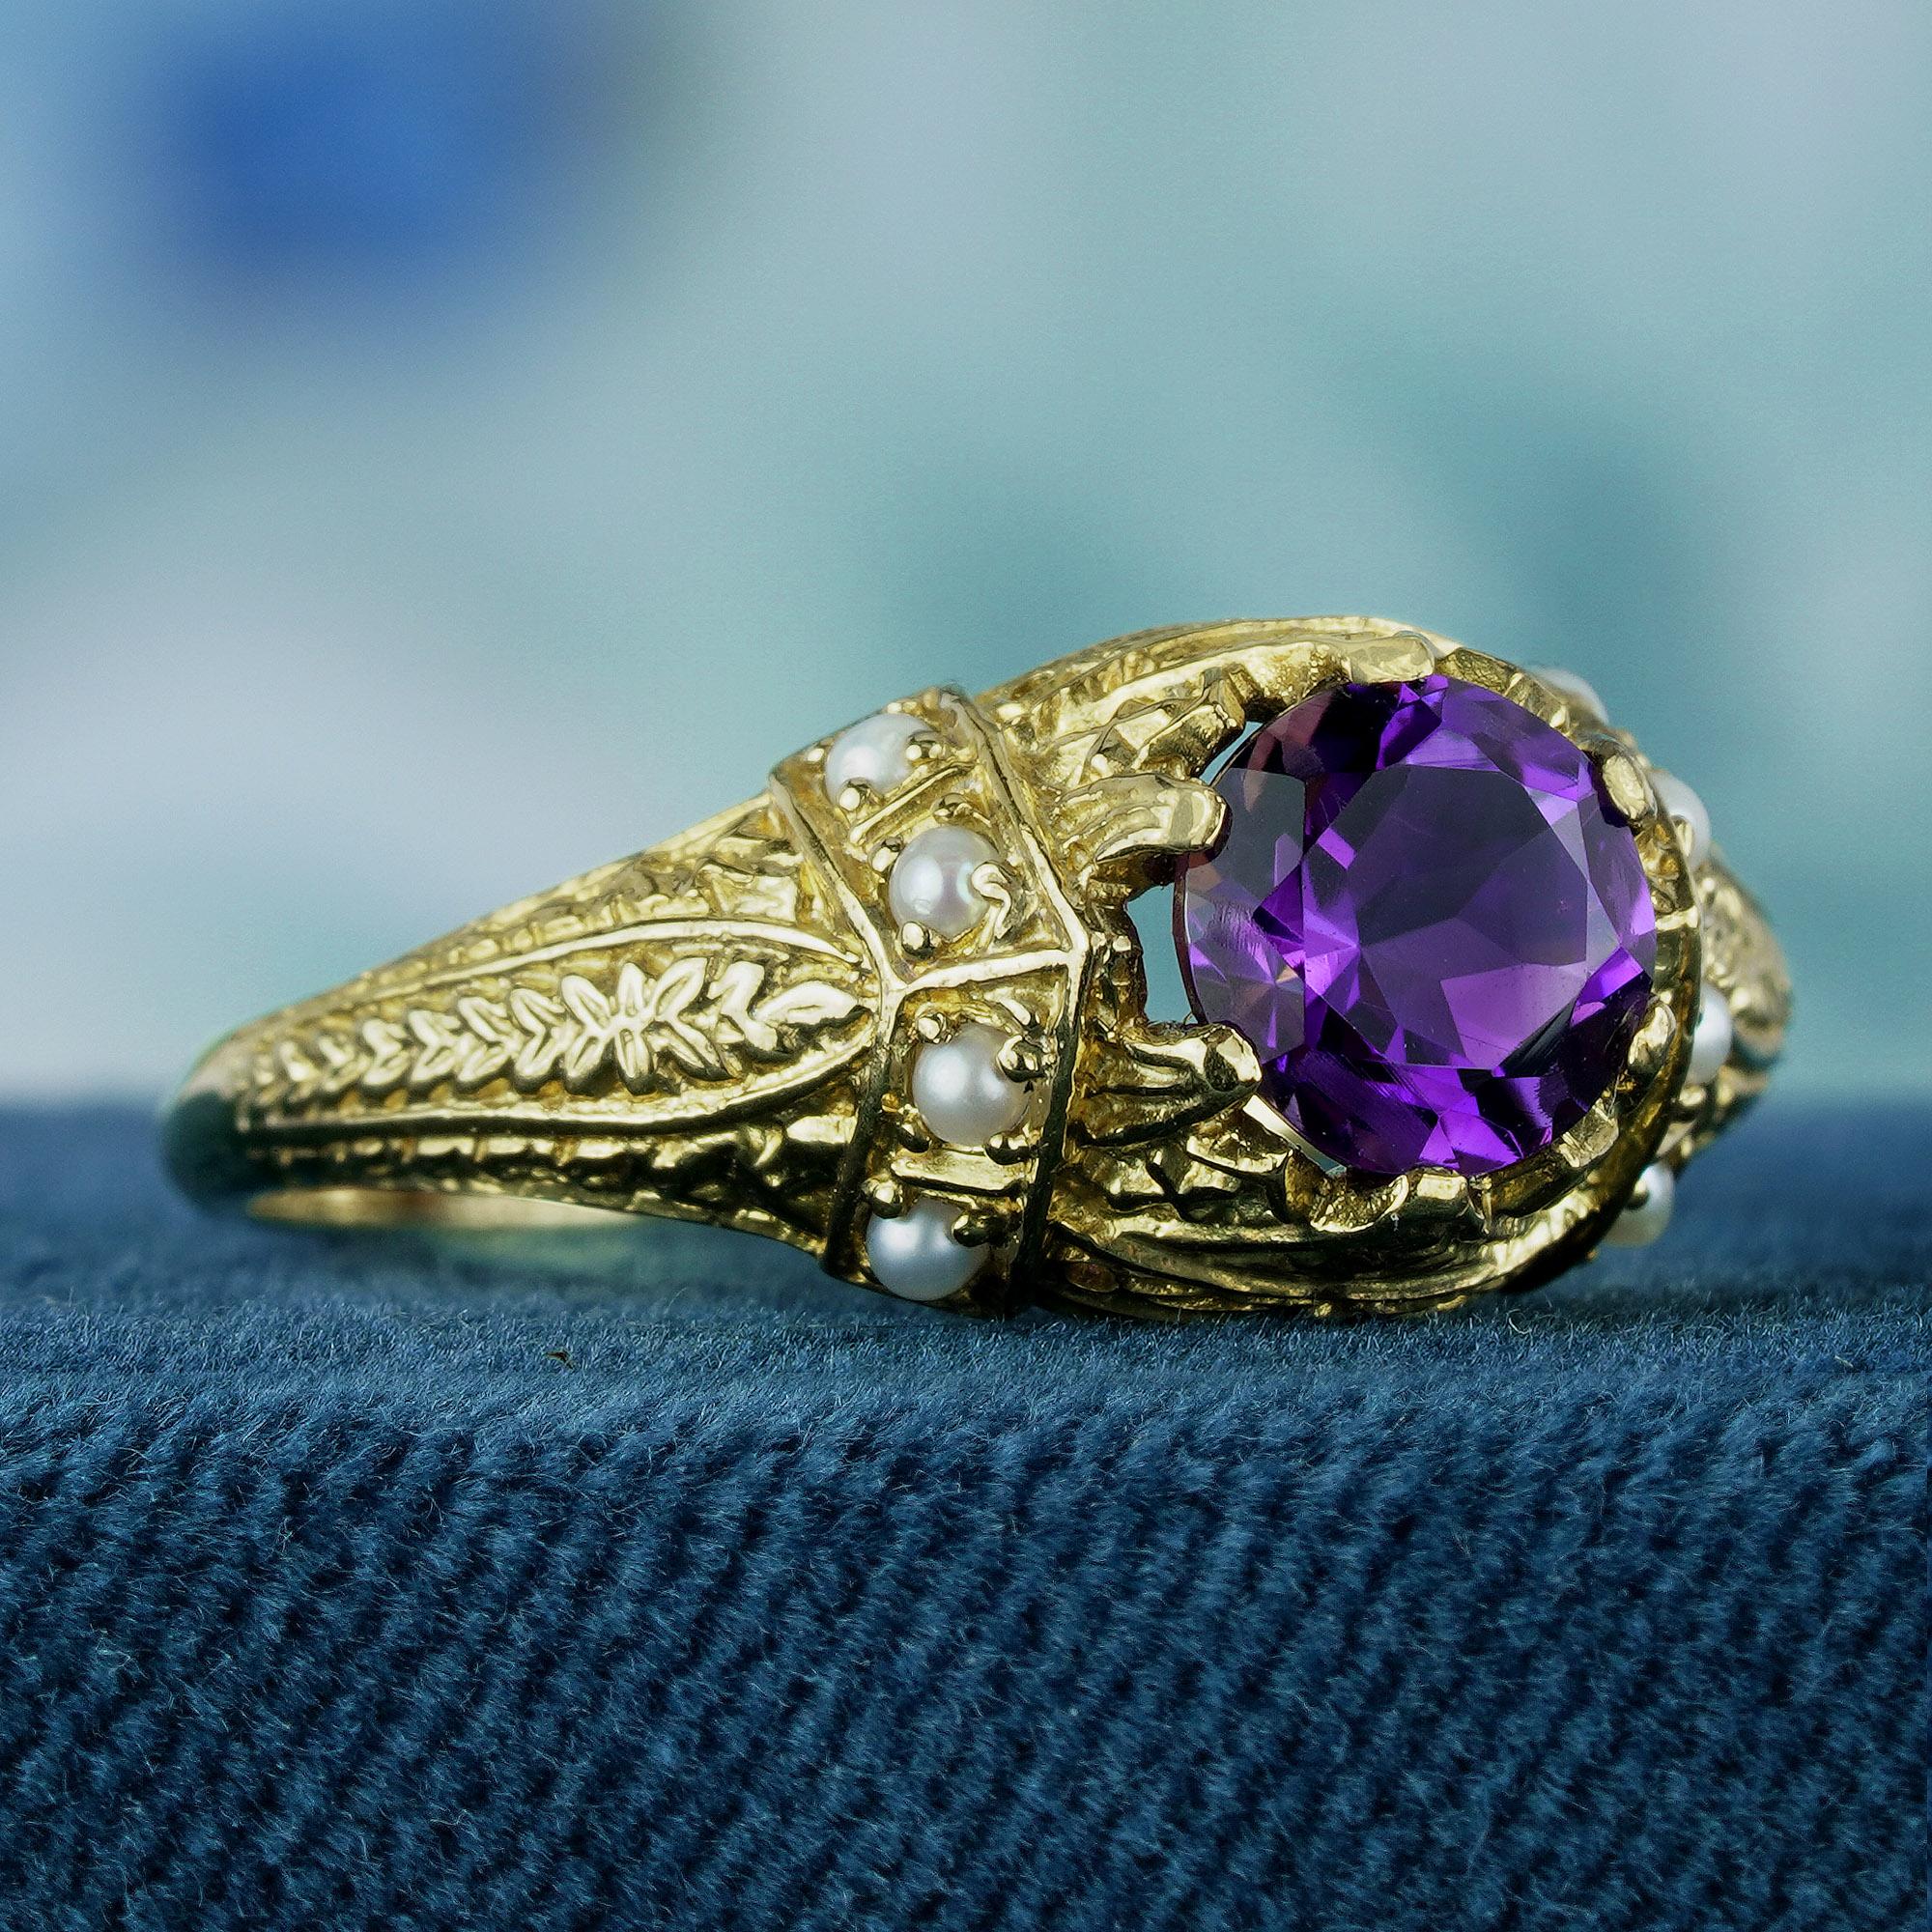 Meticulously crafted from intricately carved yellow gold, this enchanting vintage-inspired ring envelops the central round purple amethyst with timeless grace. Along each side of the carving, four cascading round white pearls delicately dance within